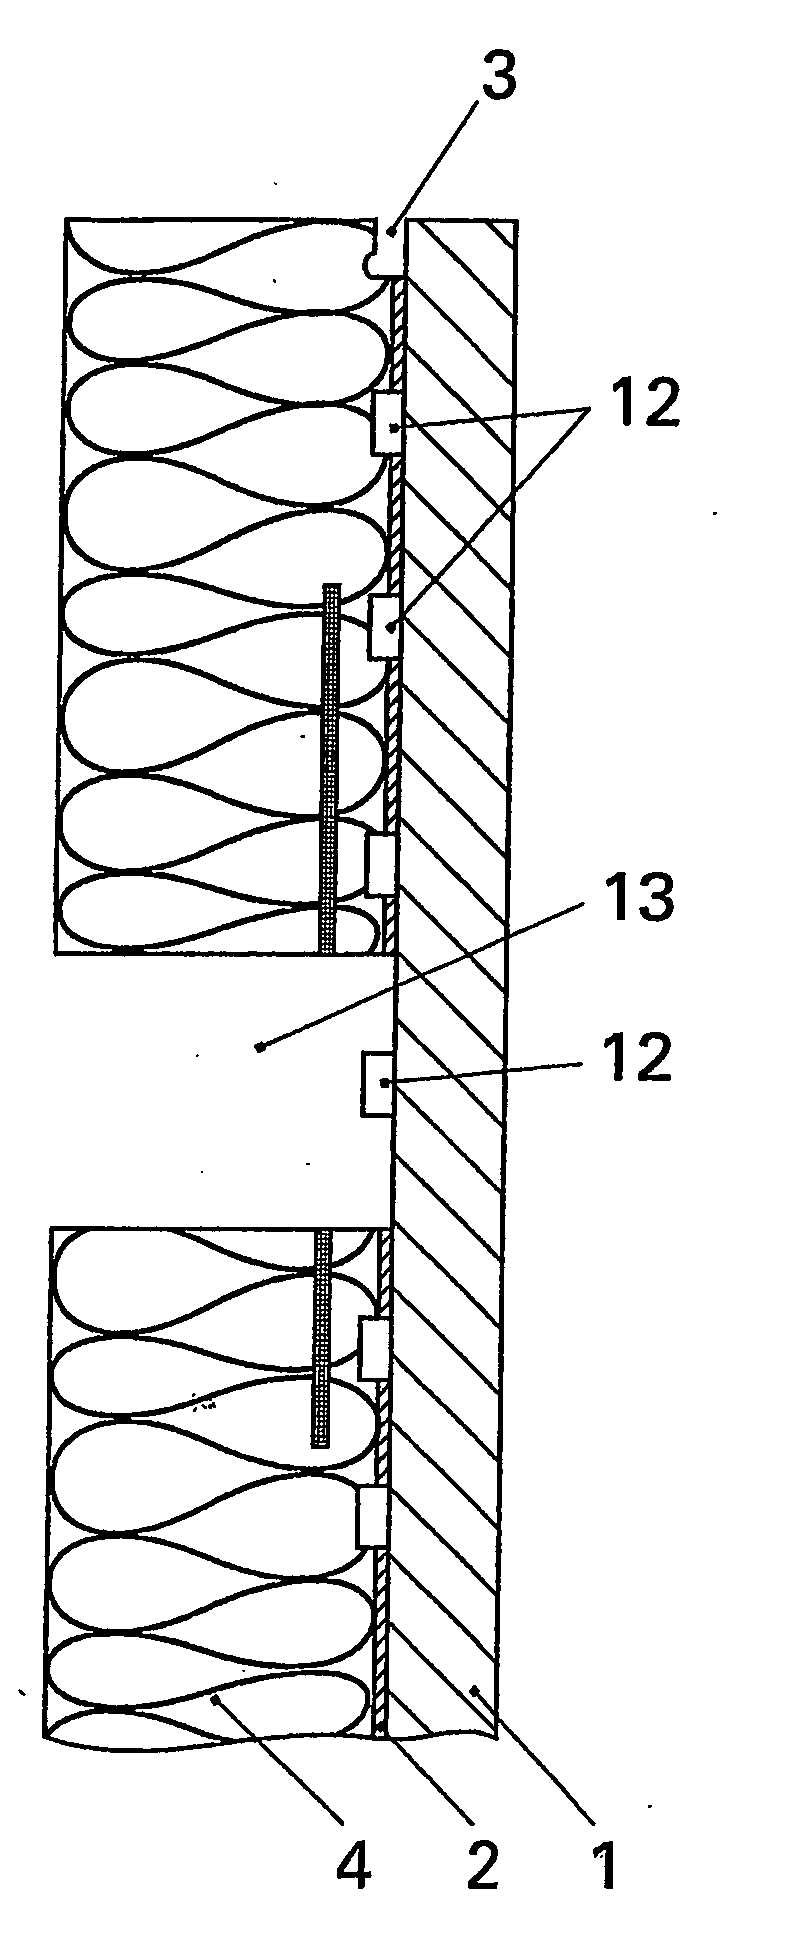 Heated Floor Element having a Surface Layer